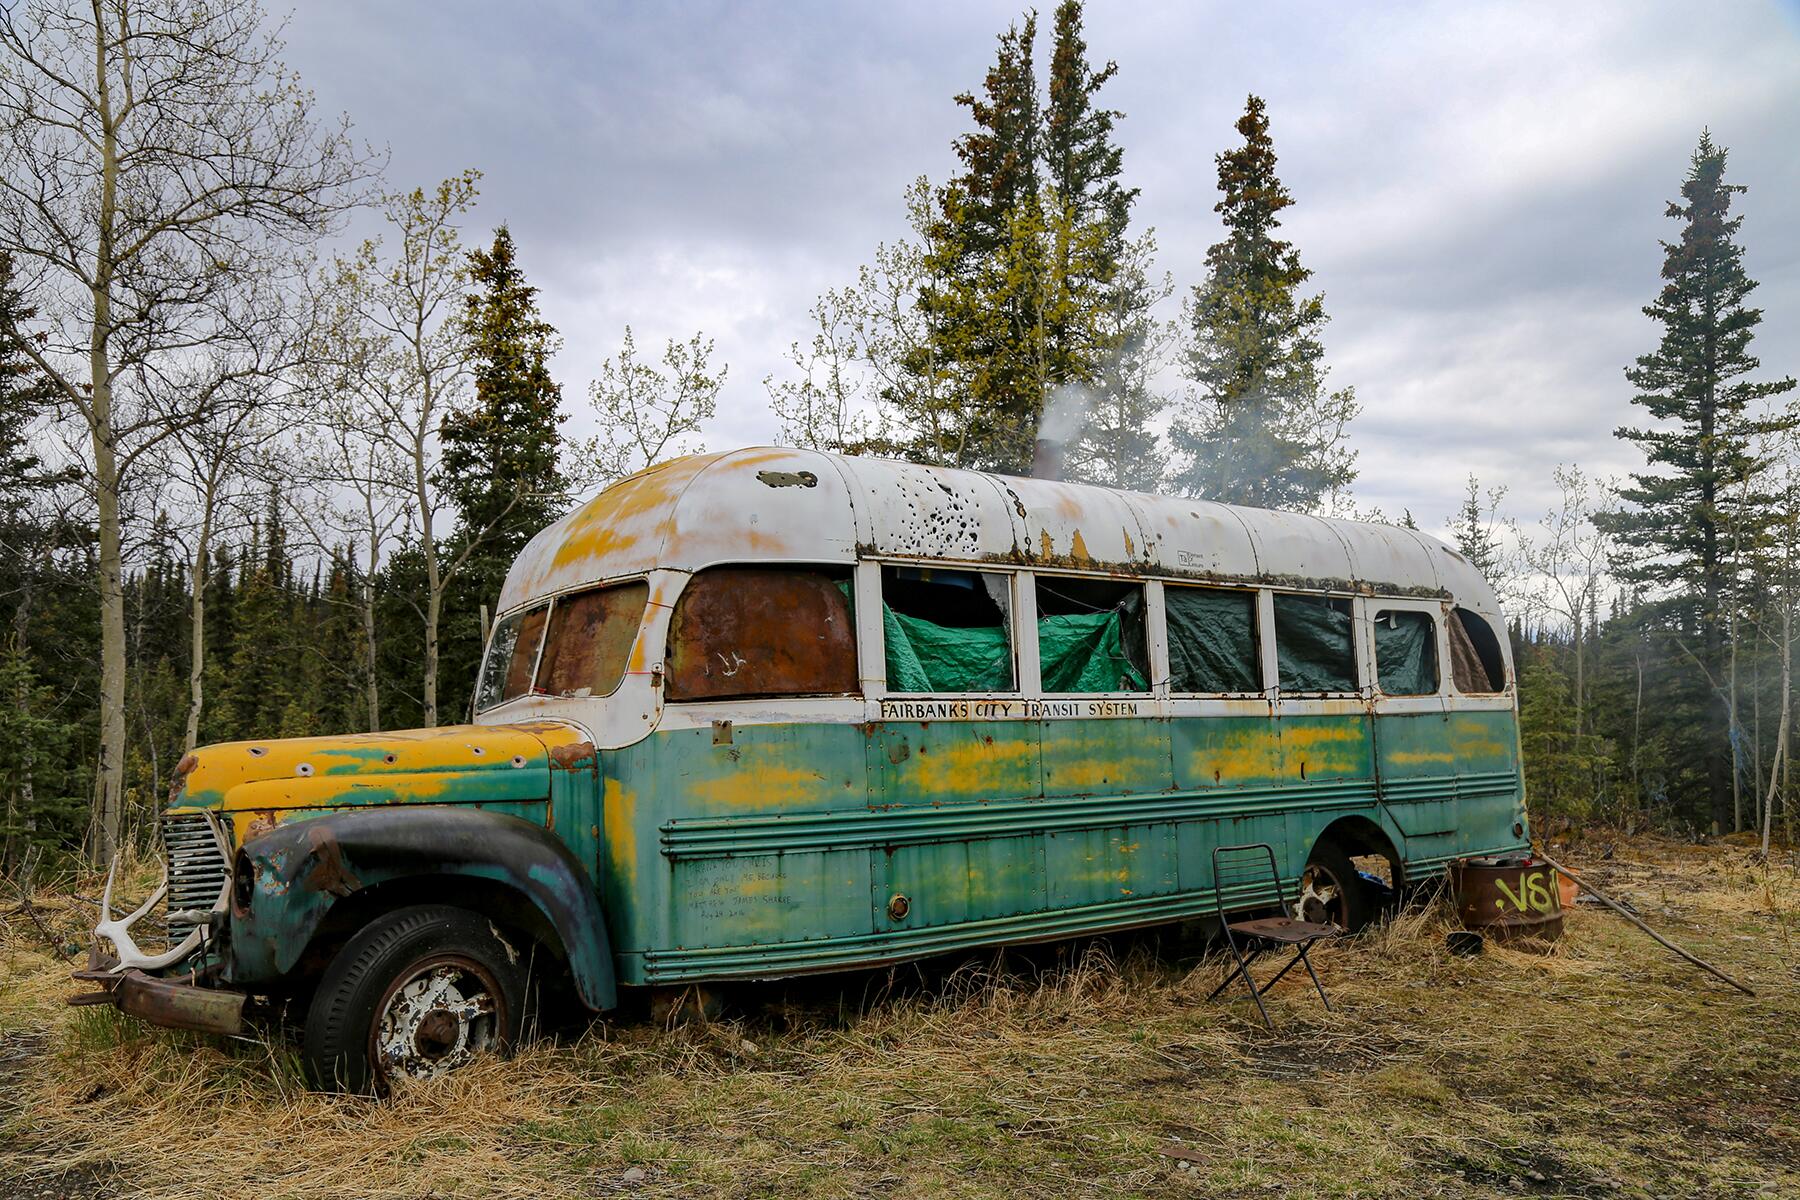 chris mccandless travel route